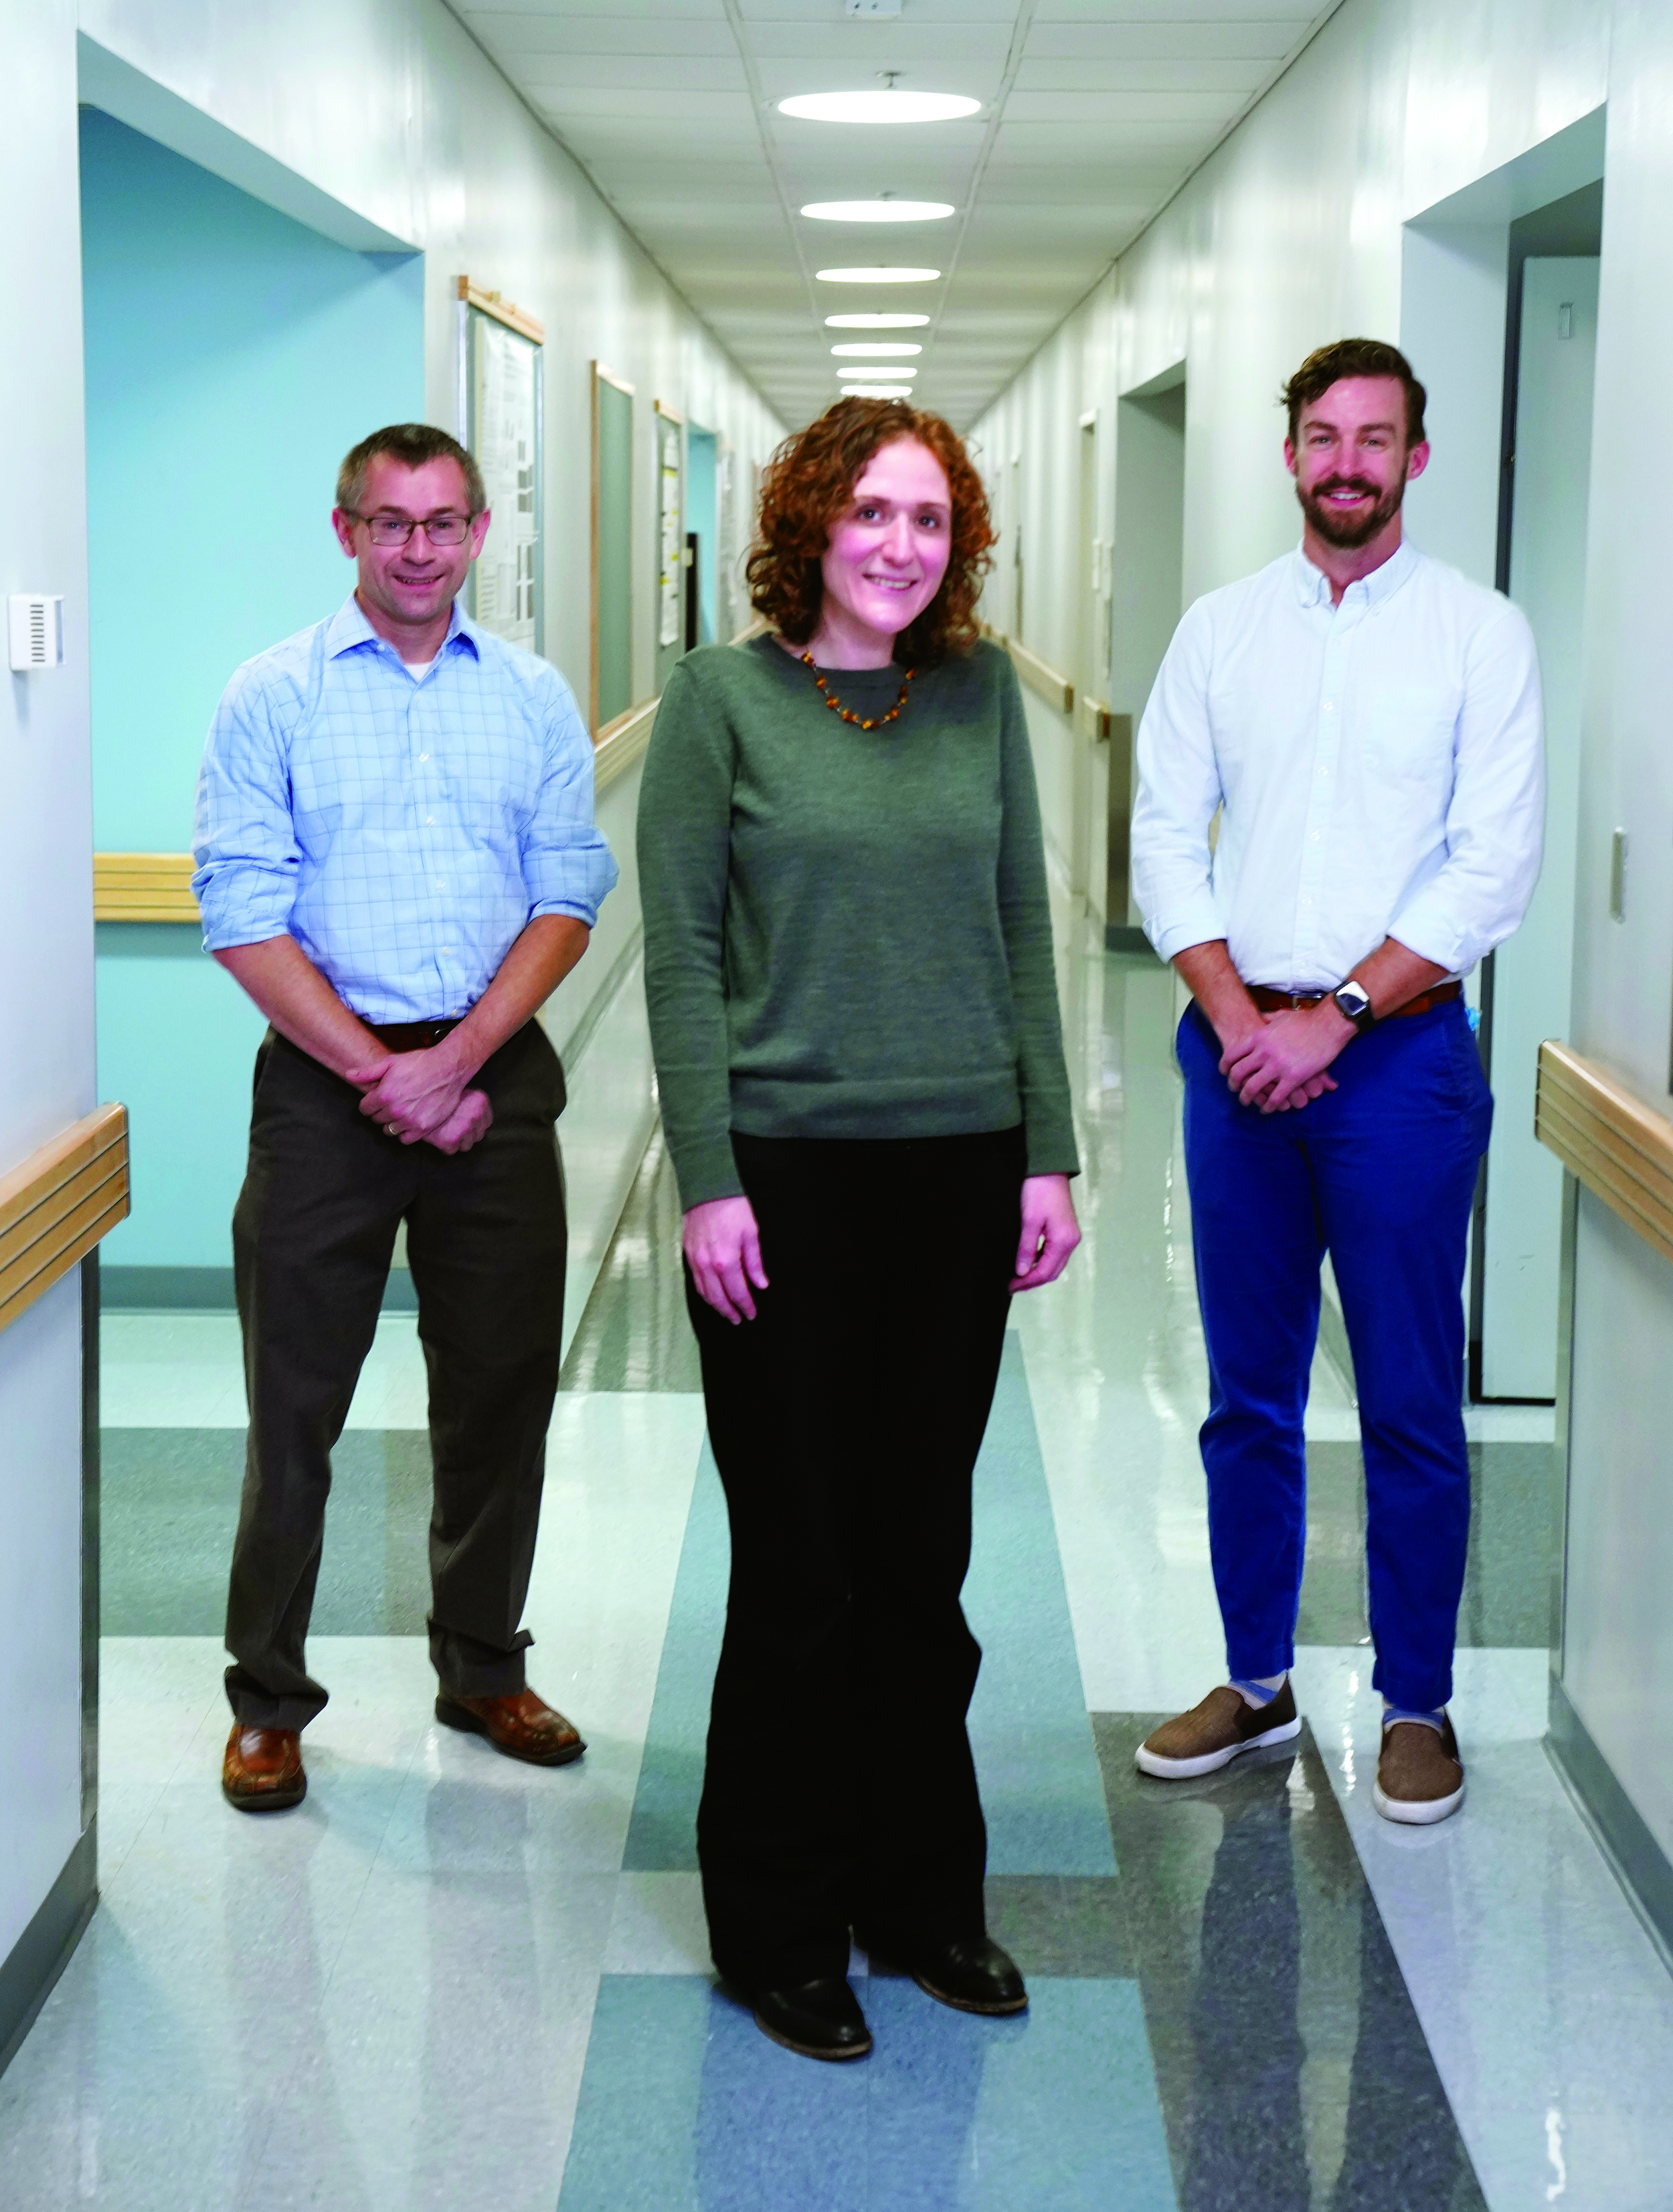 From left, Jonathan Kropski, Jennifer Sucre, and Bryce Schuler standing in a corridor.